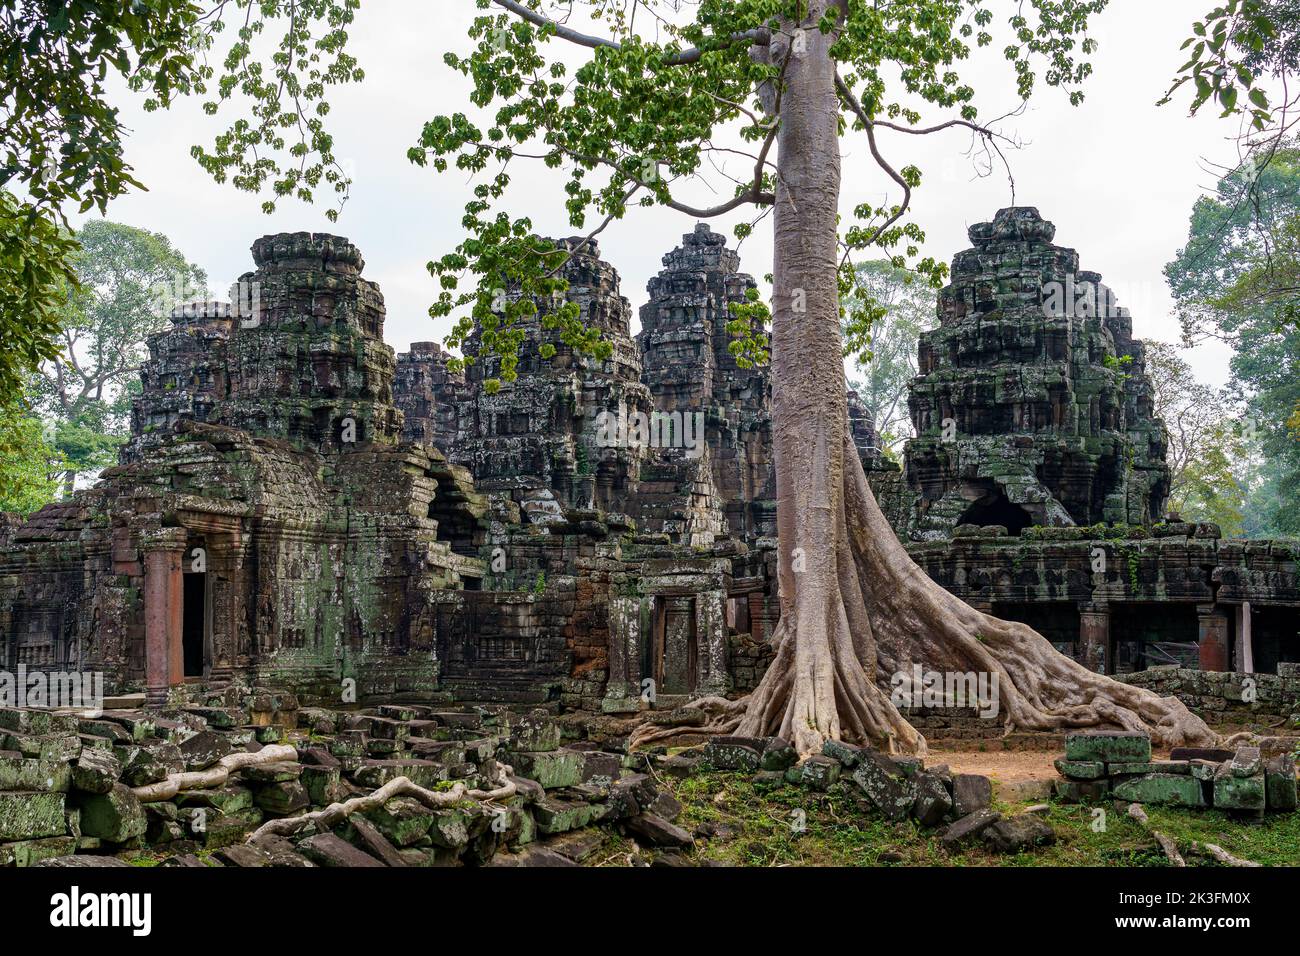 Cambodia. Siem Reap Province. The archaeological park of Angkor. The old ruins of Banteay Kdei Temple with a banyan tree Stock Photo